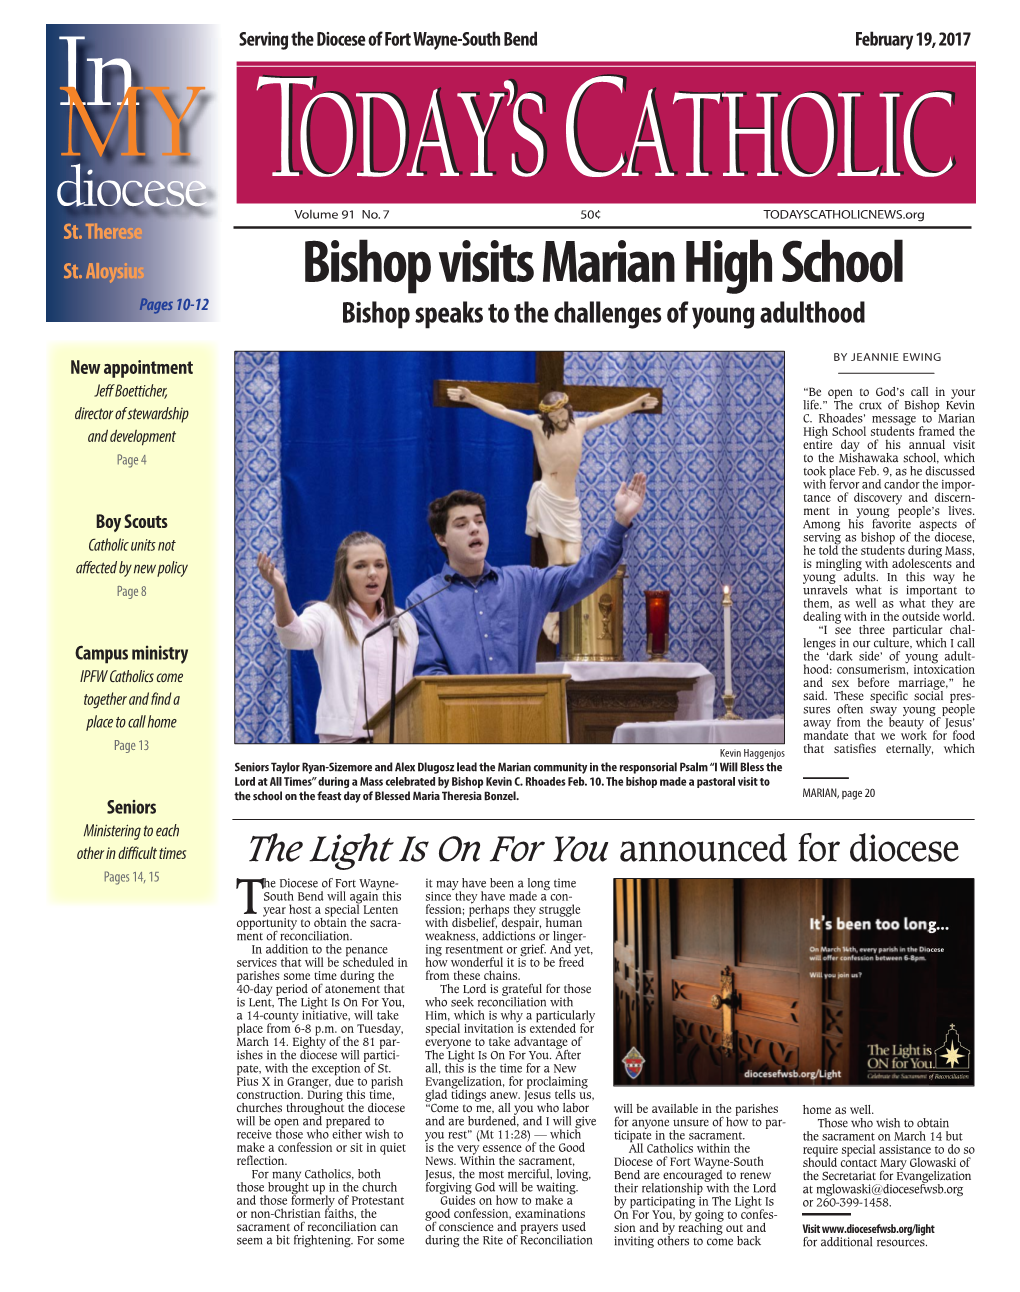 Bishop Visits Marian High School Pages 10-12 Bishop Speaks to the Challenges of Young Adulthood